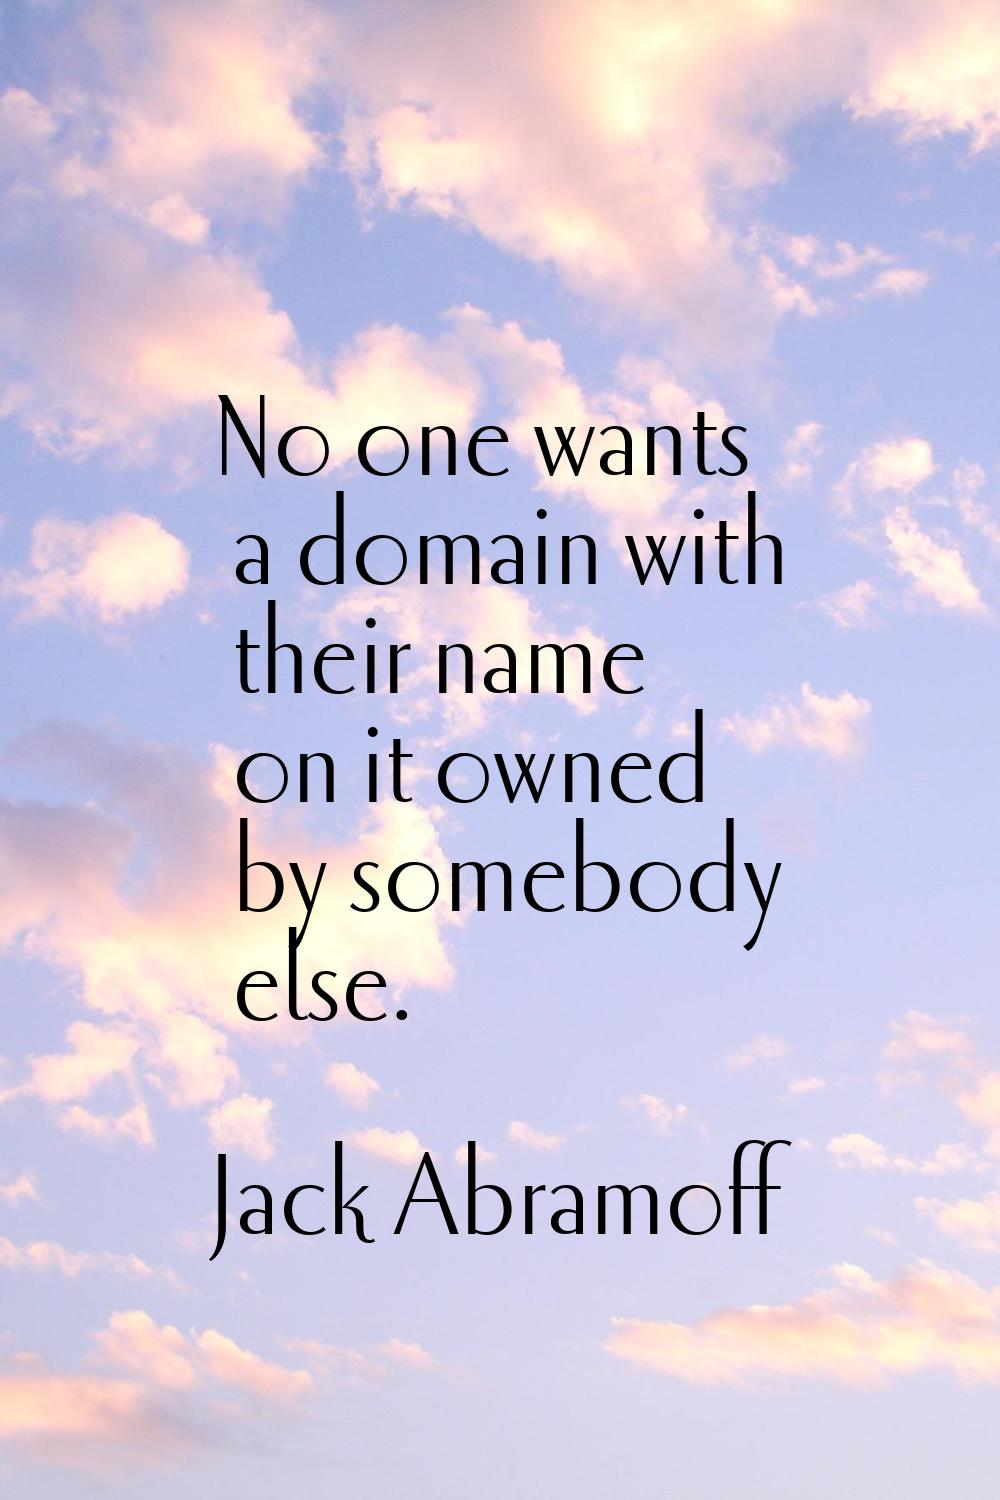 No one wants a domain with their name on it owned by somebody else.